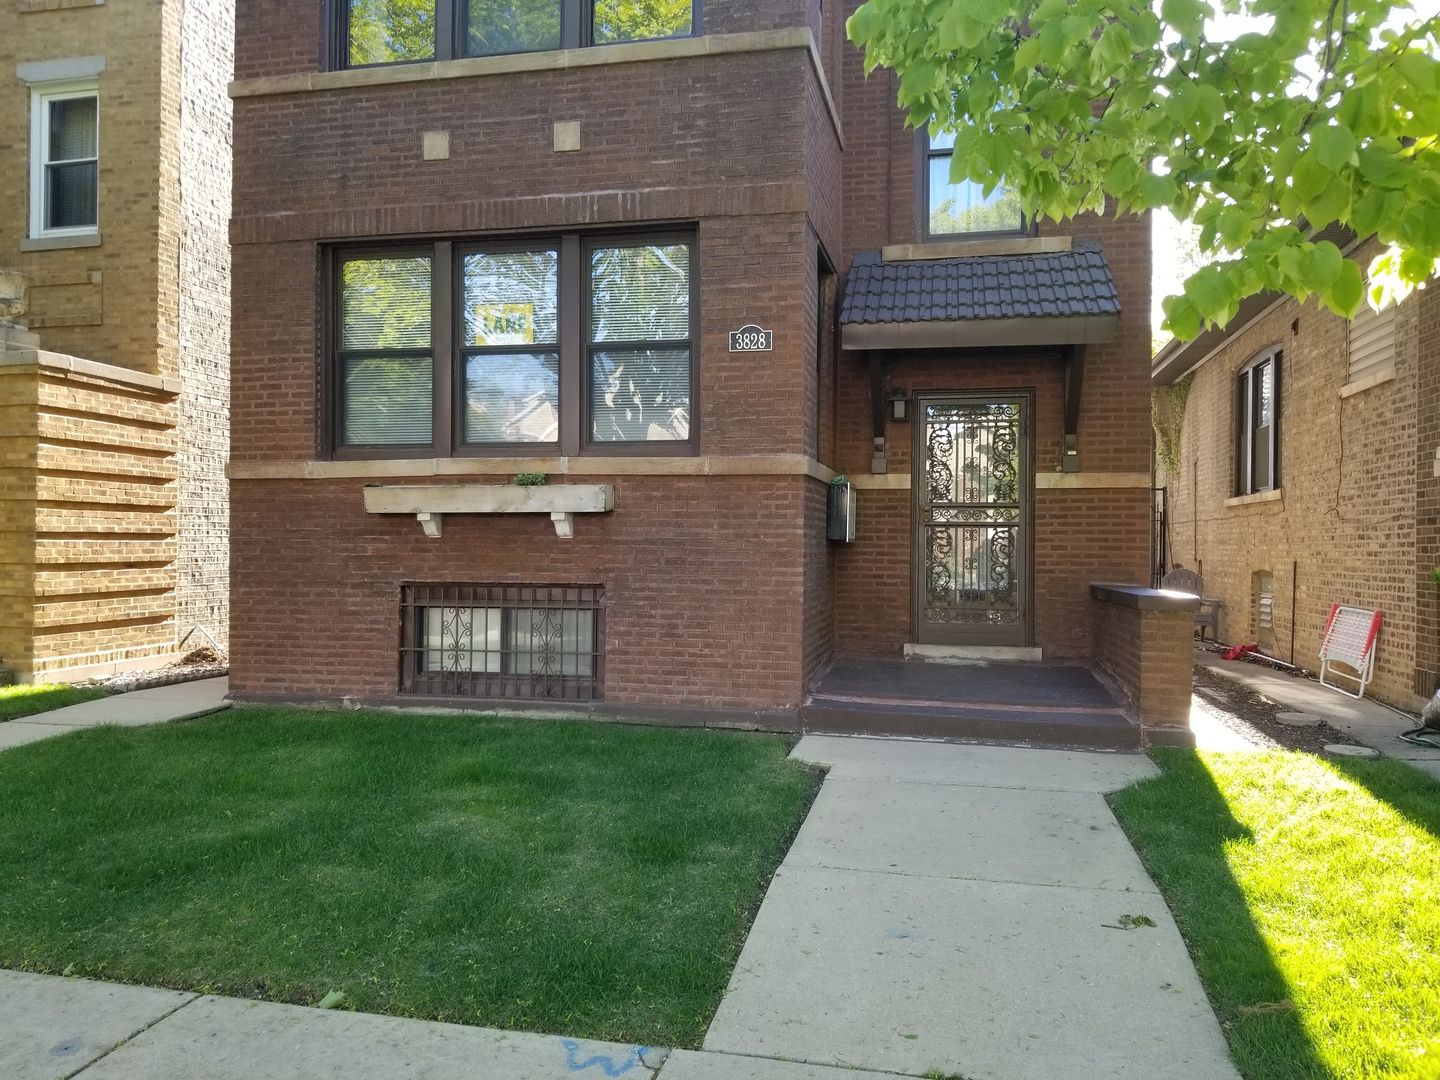 Main Photo: 3828 N Francisco Avenue Unit GN in Chicago: CHI - Irving Park Residential Lease for sale ()  : MLS®# 11614491